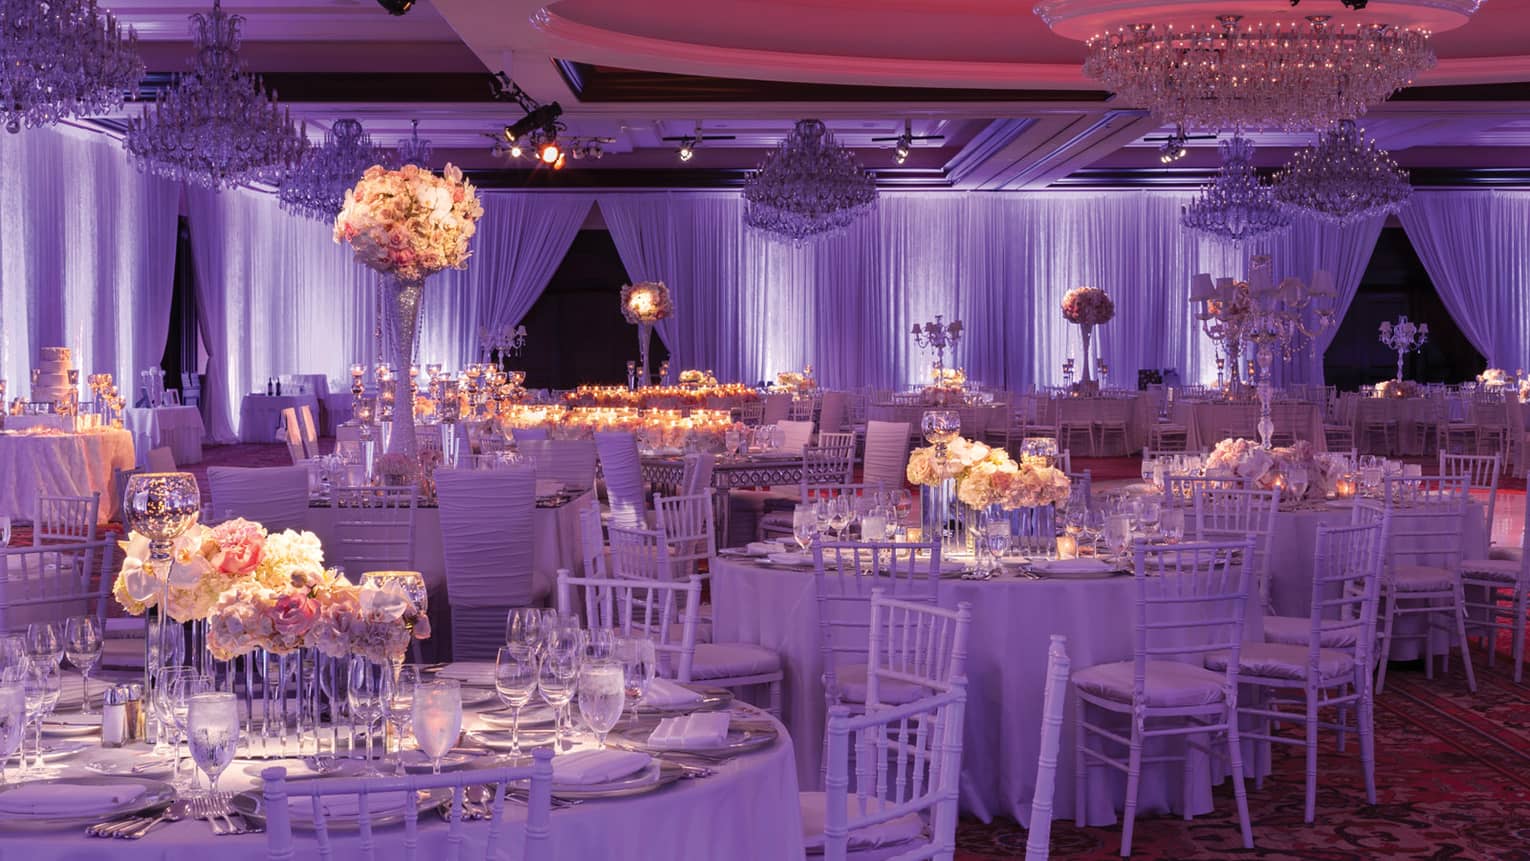 Wedding reception white tables and chairs, pink floral arrangements in ballroom with purple lights